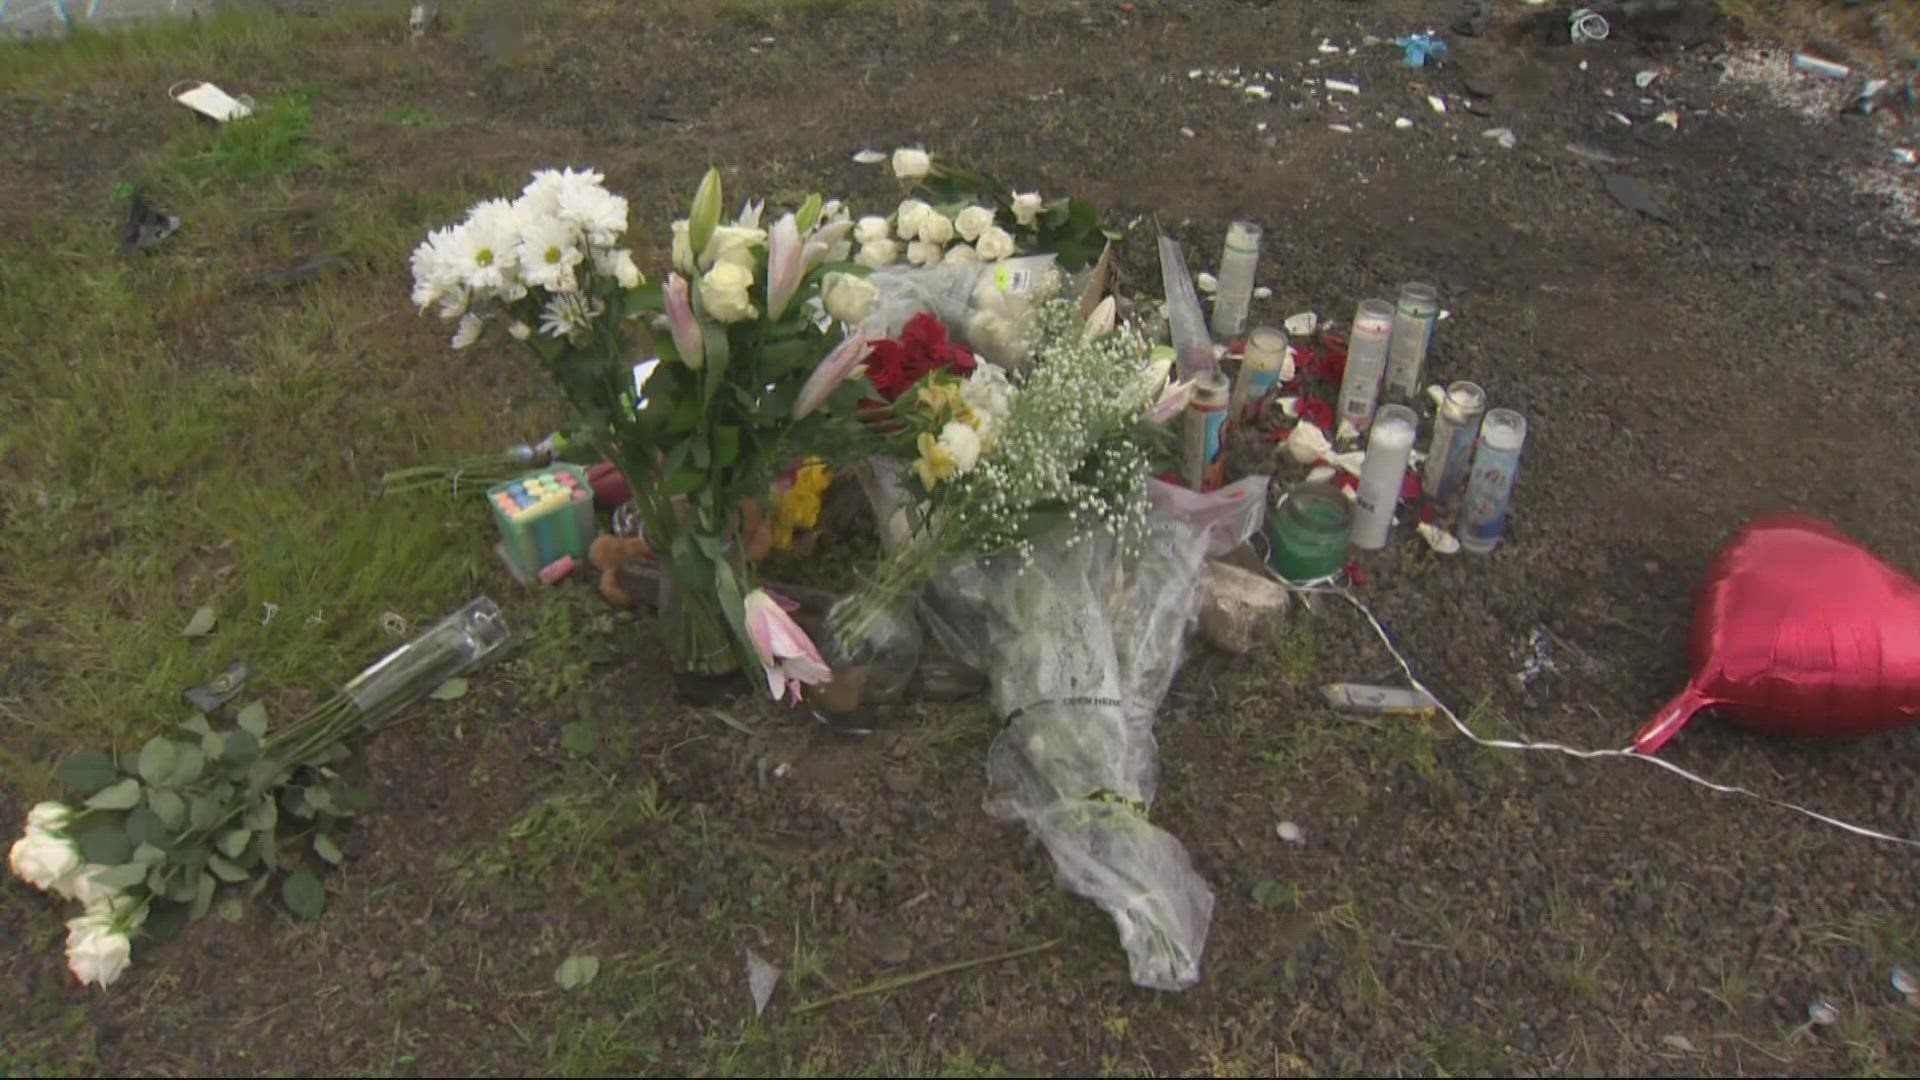 Two students died and three others and a deputy were injured in a crash in Beaverton April 27. KGW's Mike Benner has the latest.